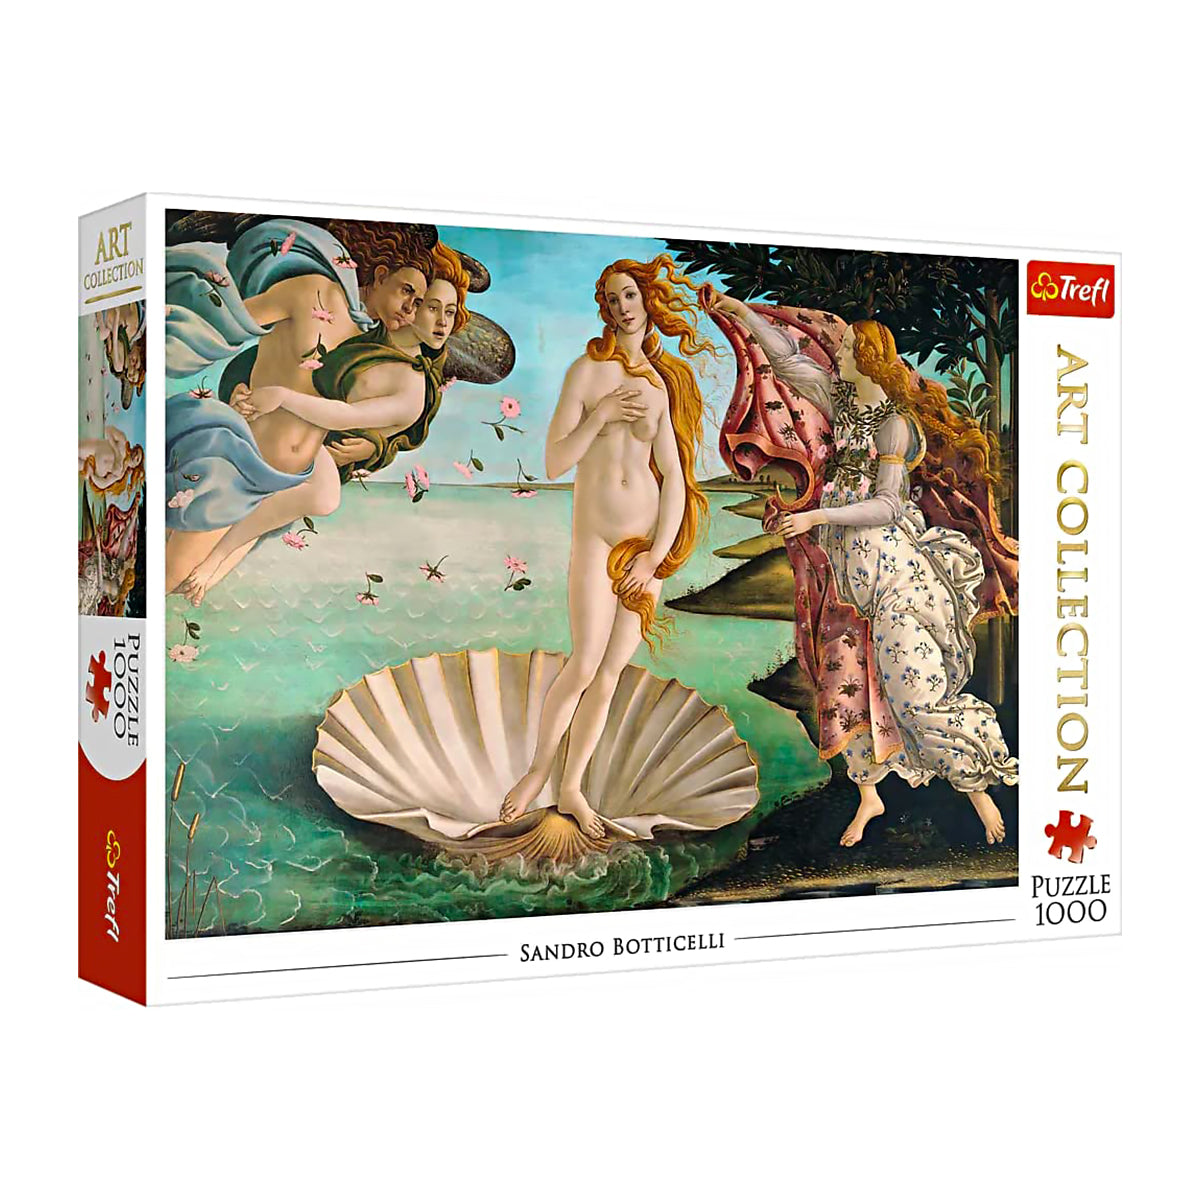 Playing Wordle every day is a great start, but a more exciting way to challenge your mind is through completing puzzles. In time for National Puzzle Day, Trefl has launched 'The Birth of Venus' jigsaw puzzle.